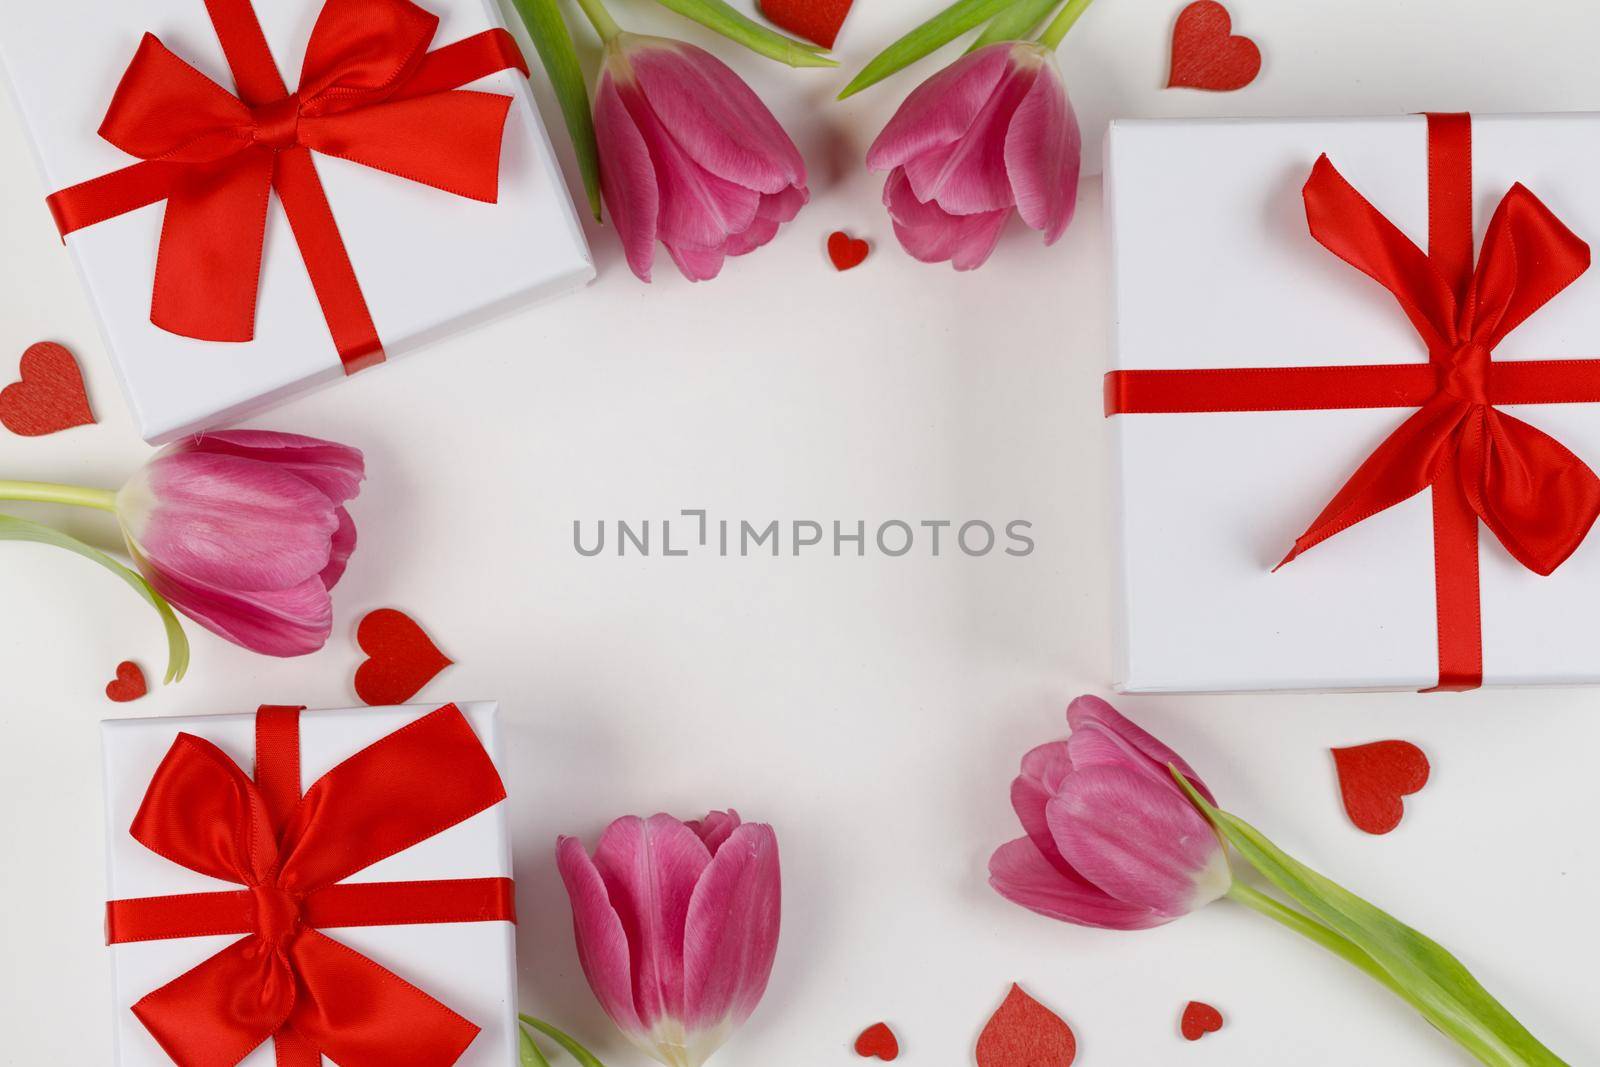 Pink tulips gifts and hearts border frame with copy space isolated on white background Valentines day concept